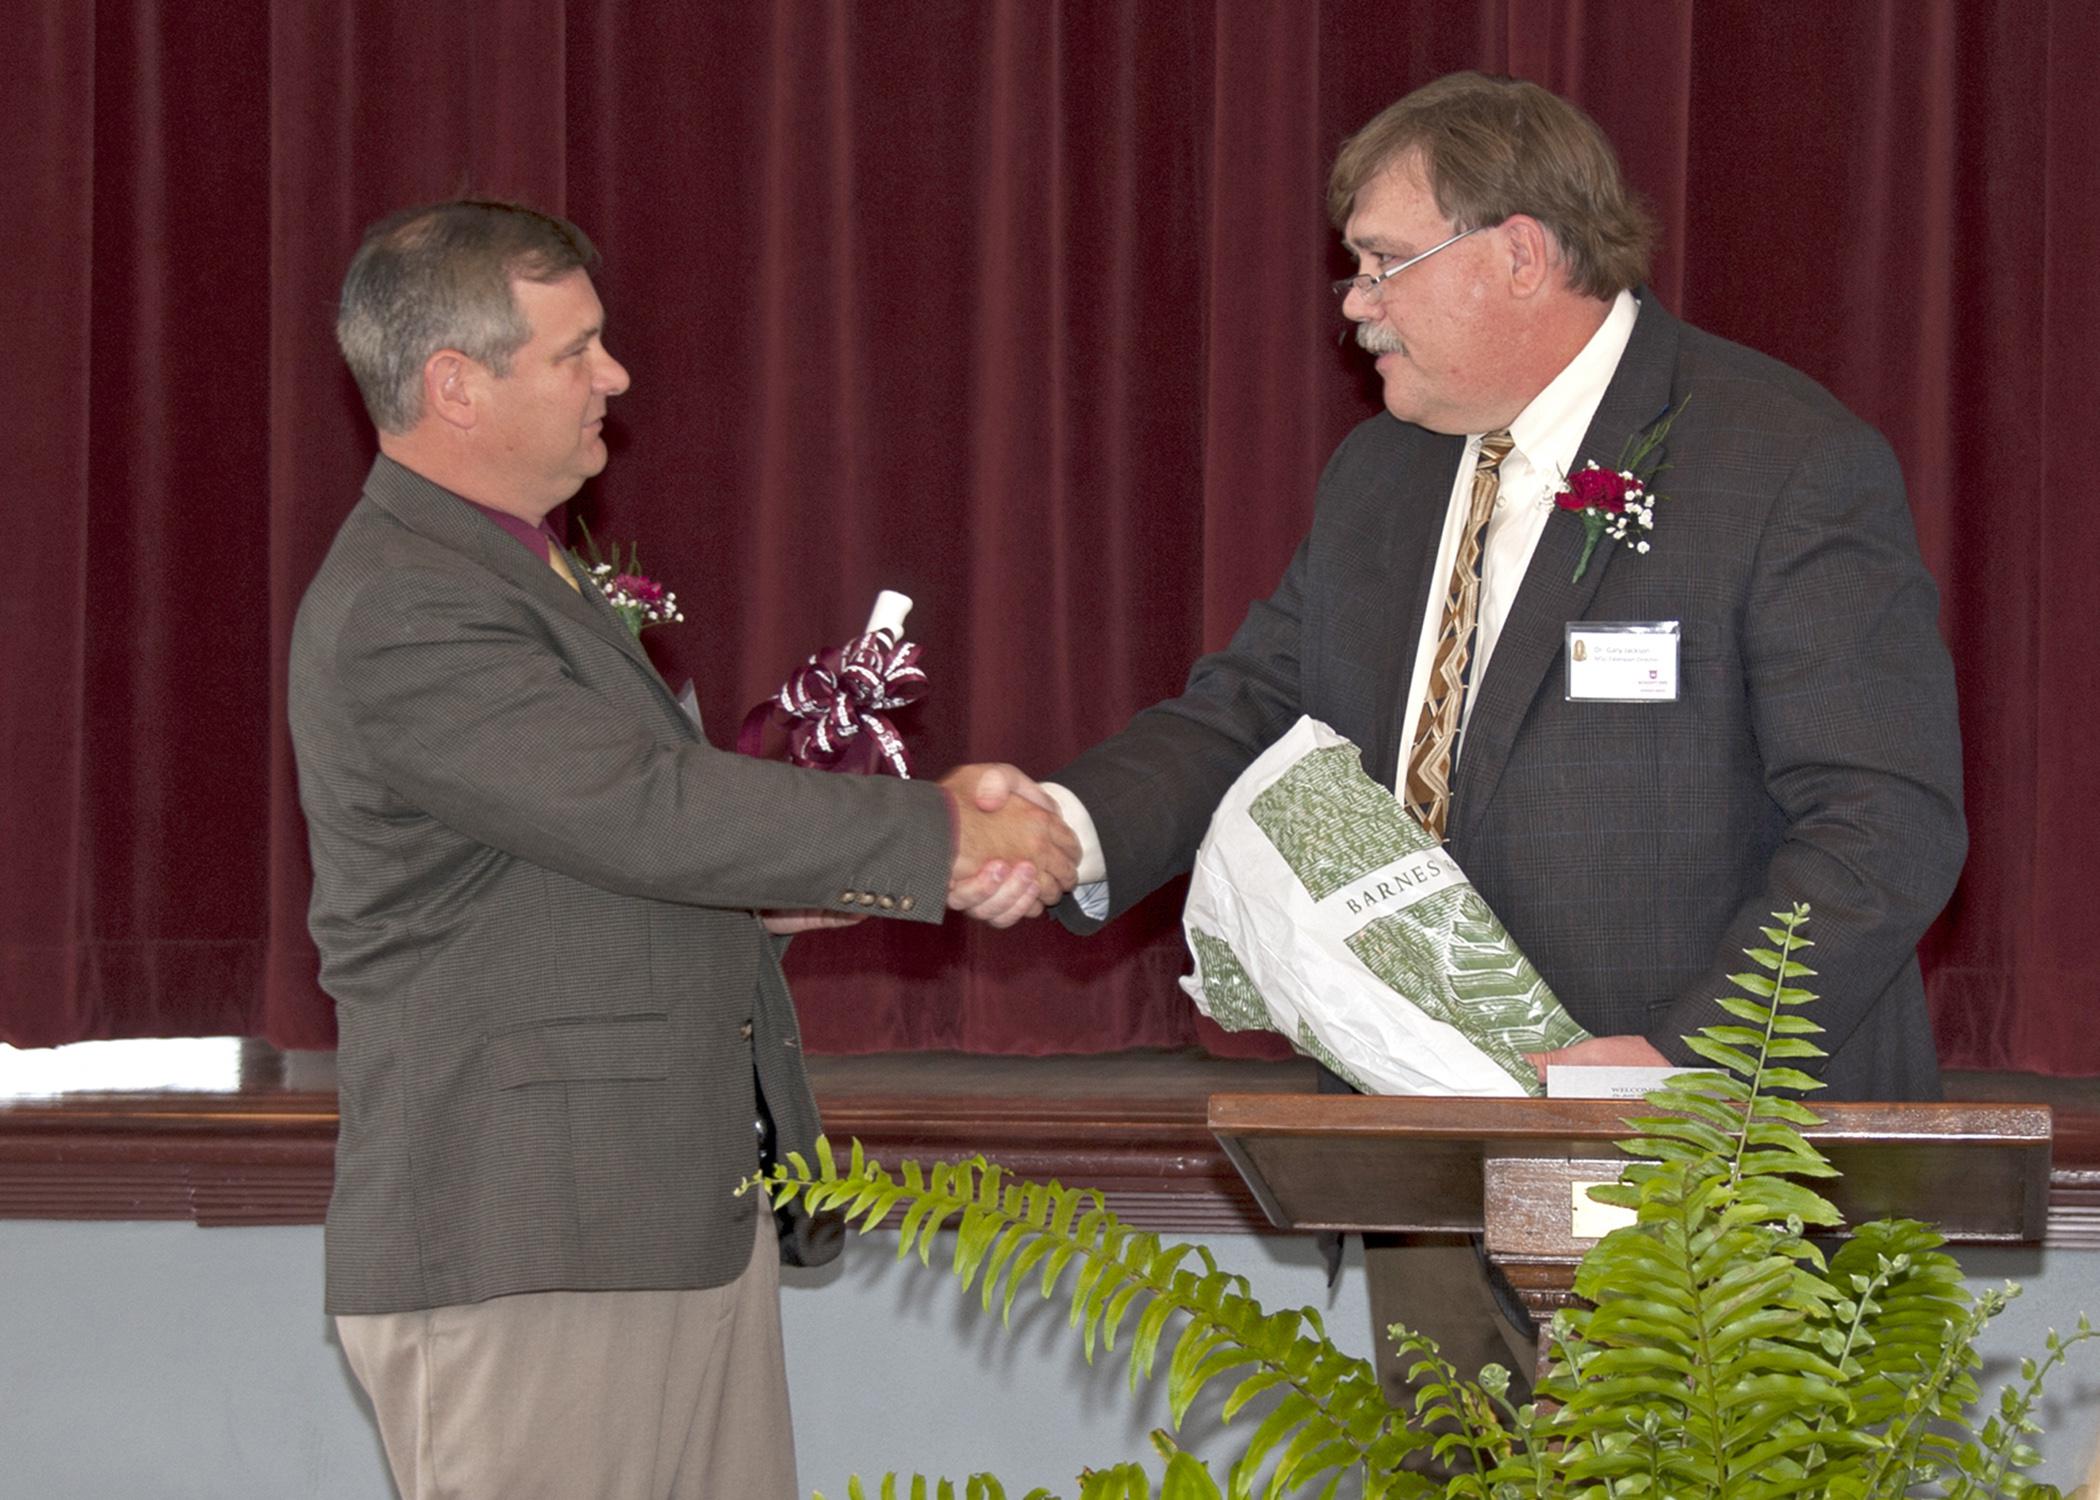 Mississippi State University Extension Service Director Gary Jackson, right, presents Forrest County Agricultural High School Superintendent Jerry Morgan with an MSU cowbell April 8, 2014, to mark the beginning of a partnership between the school and university. The Extension Service loaned the school an interactive video system that allows students, faculty and staff to attend Extension educational programs. (Photo by MSU Ag Communications/Kat Lawrence)